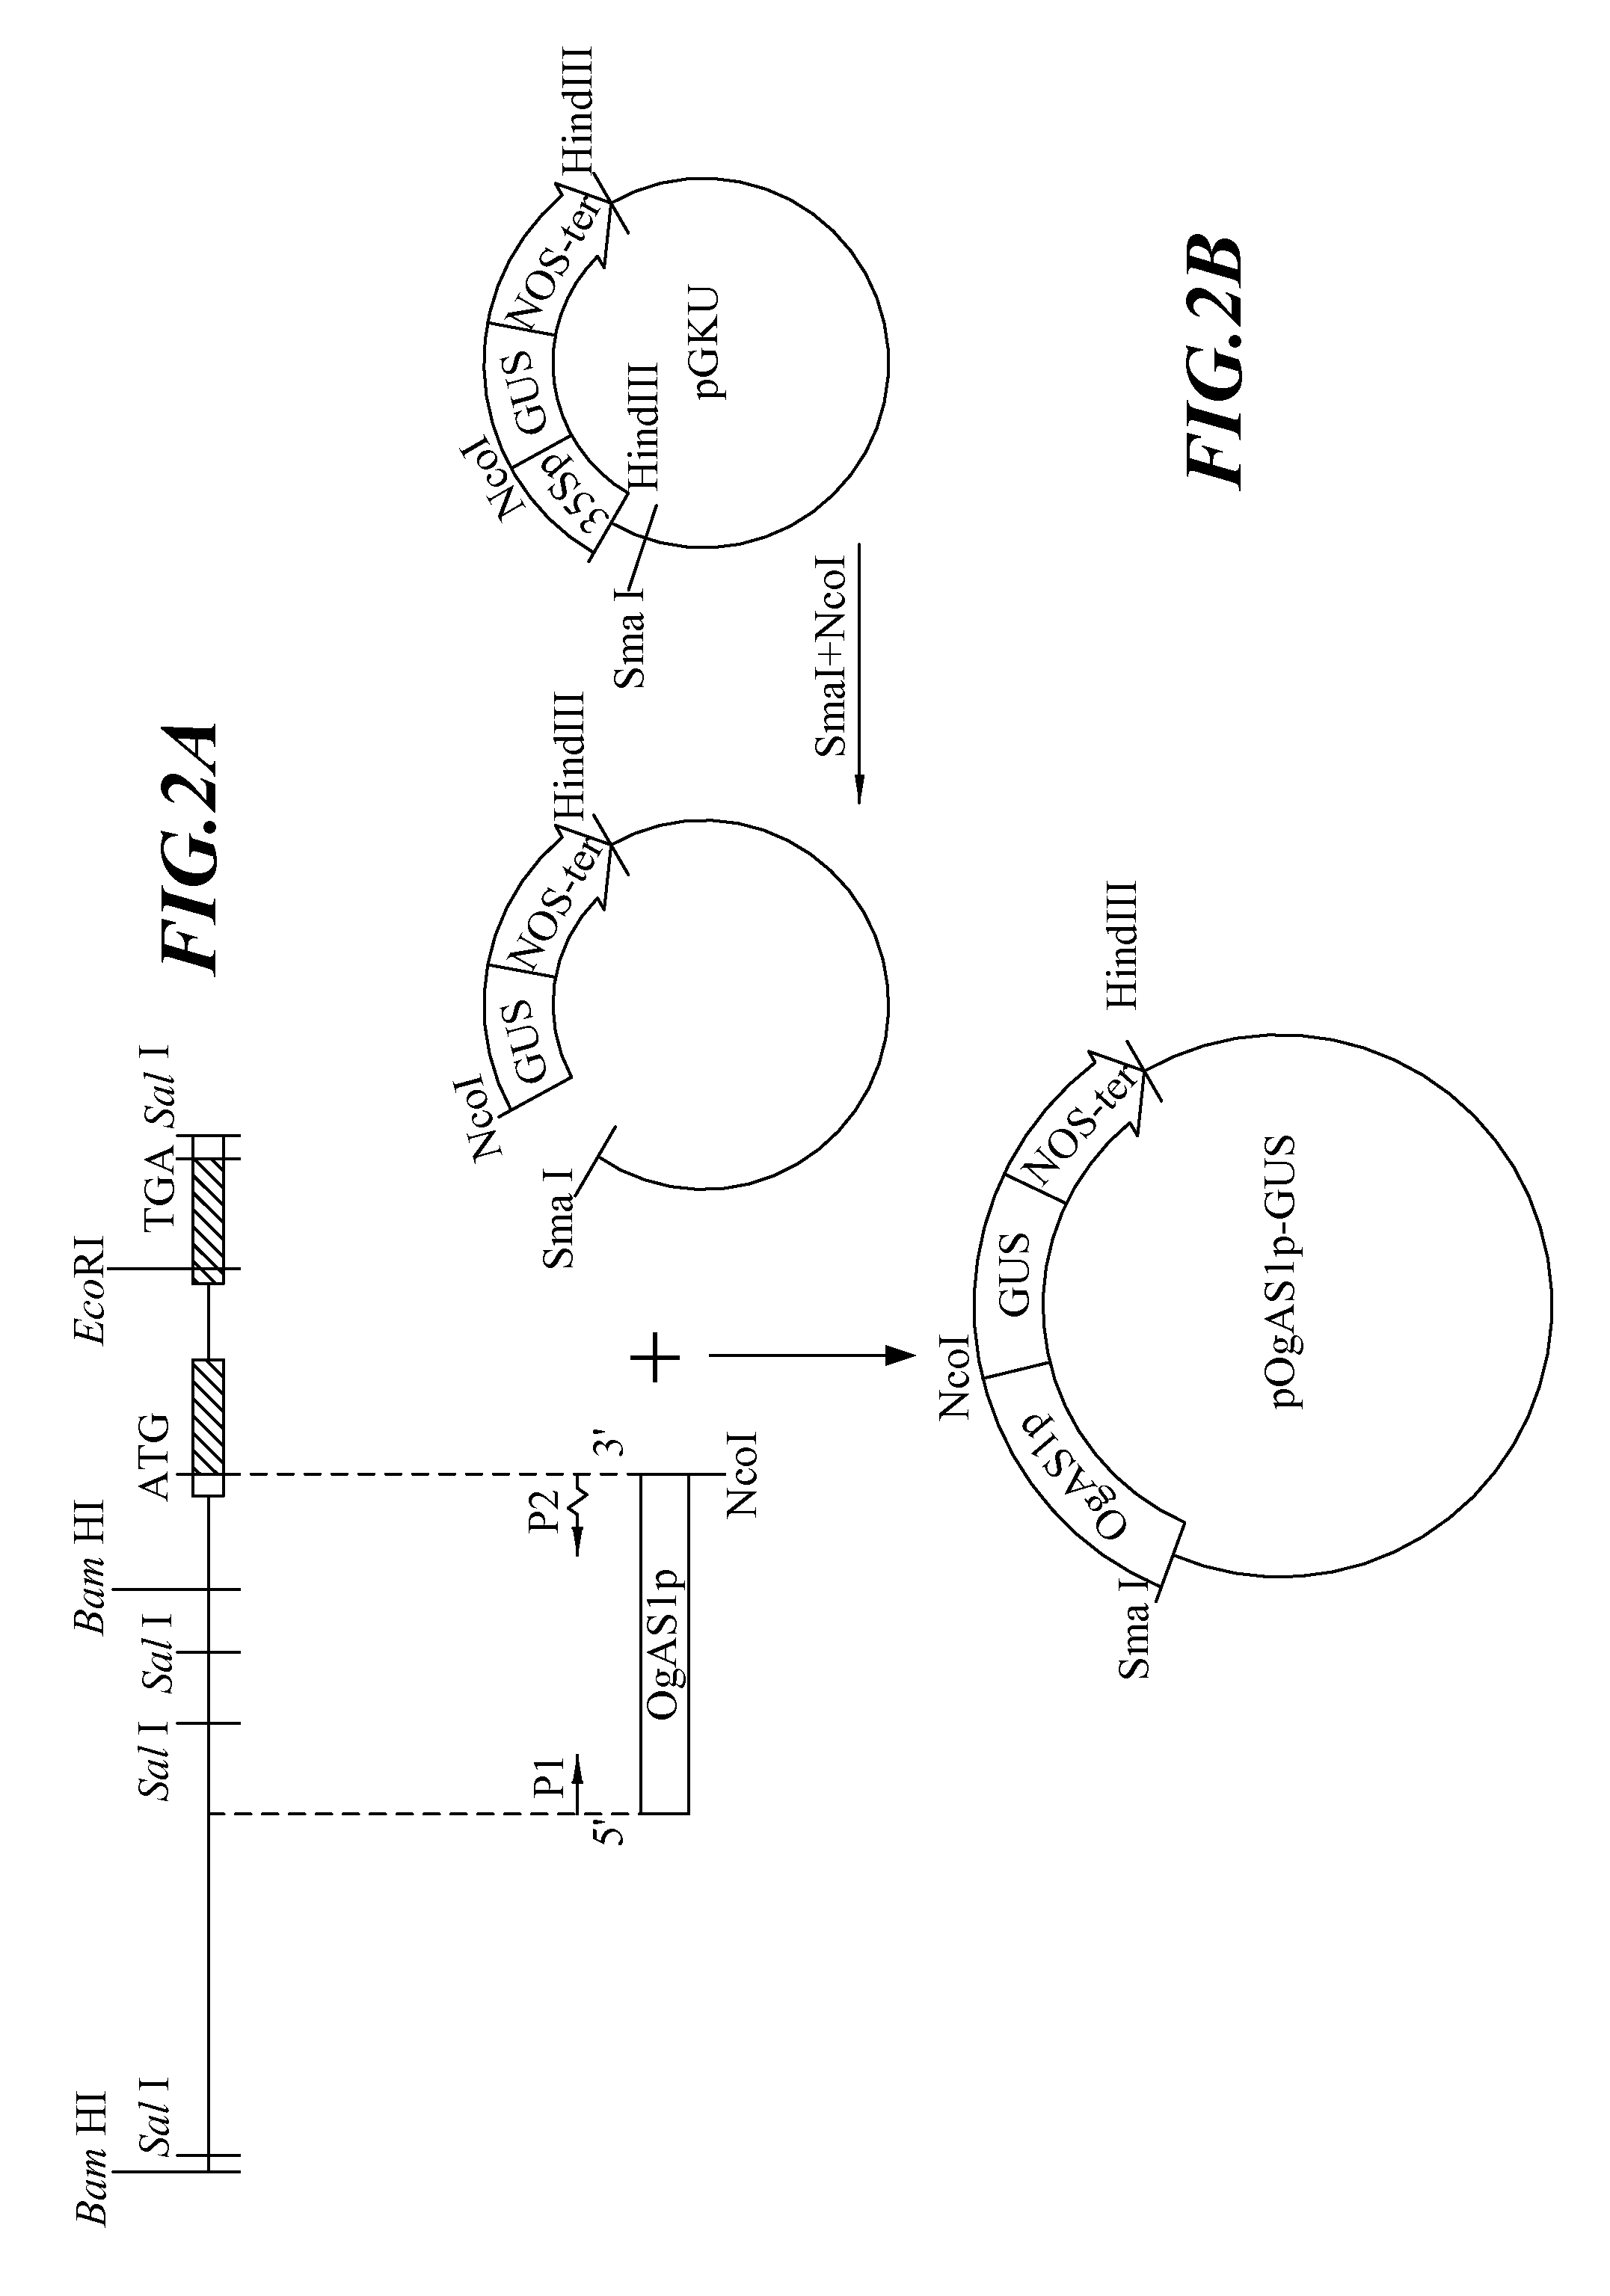 Anther-specific expression promoter in plant and application thereof